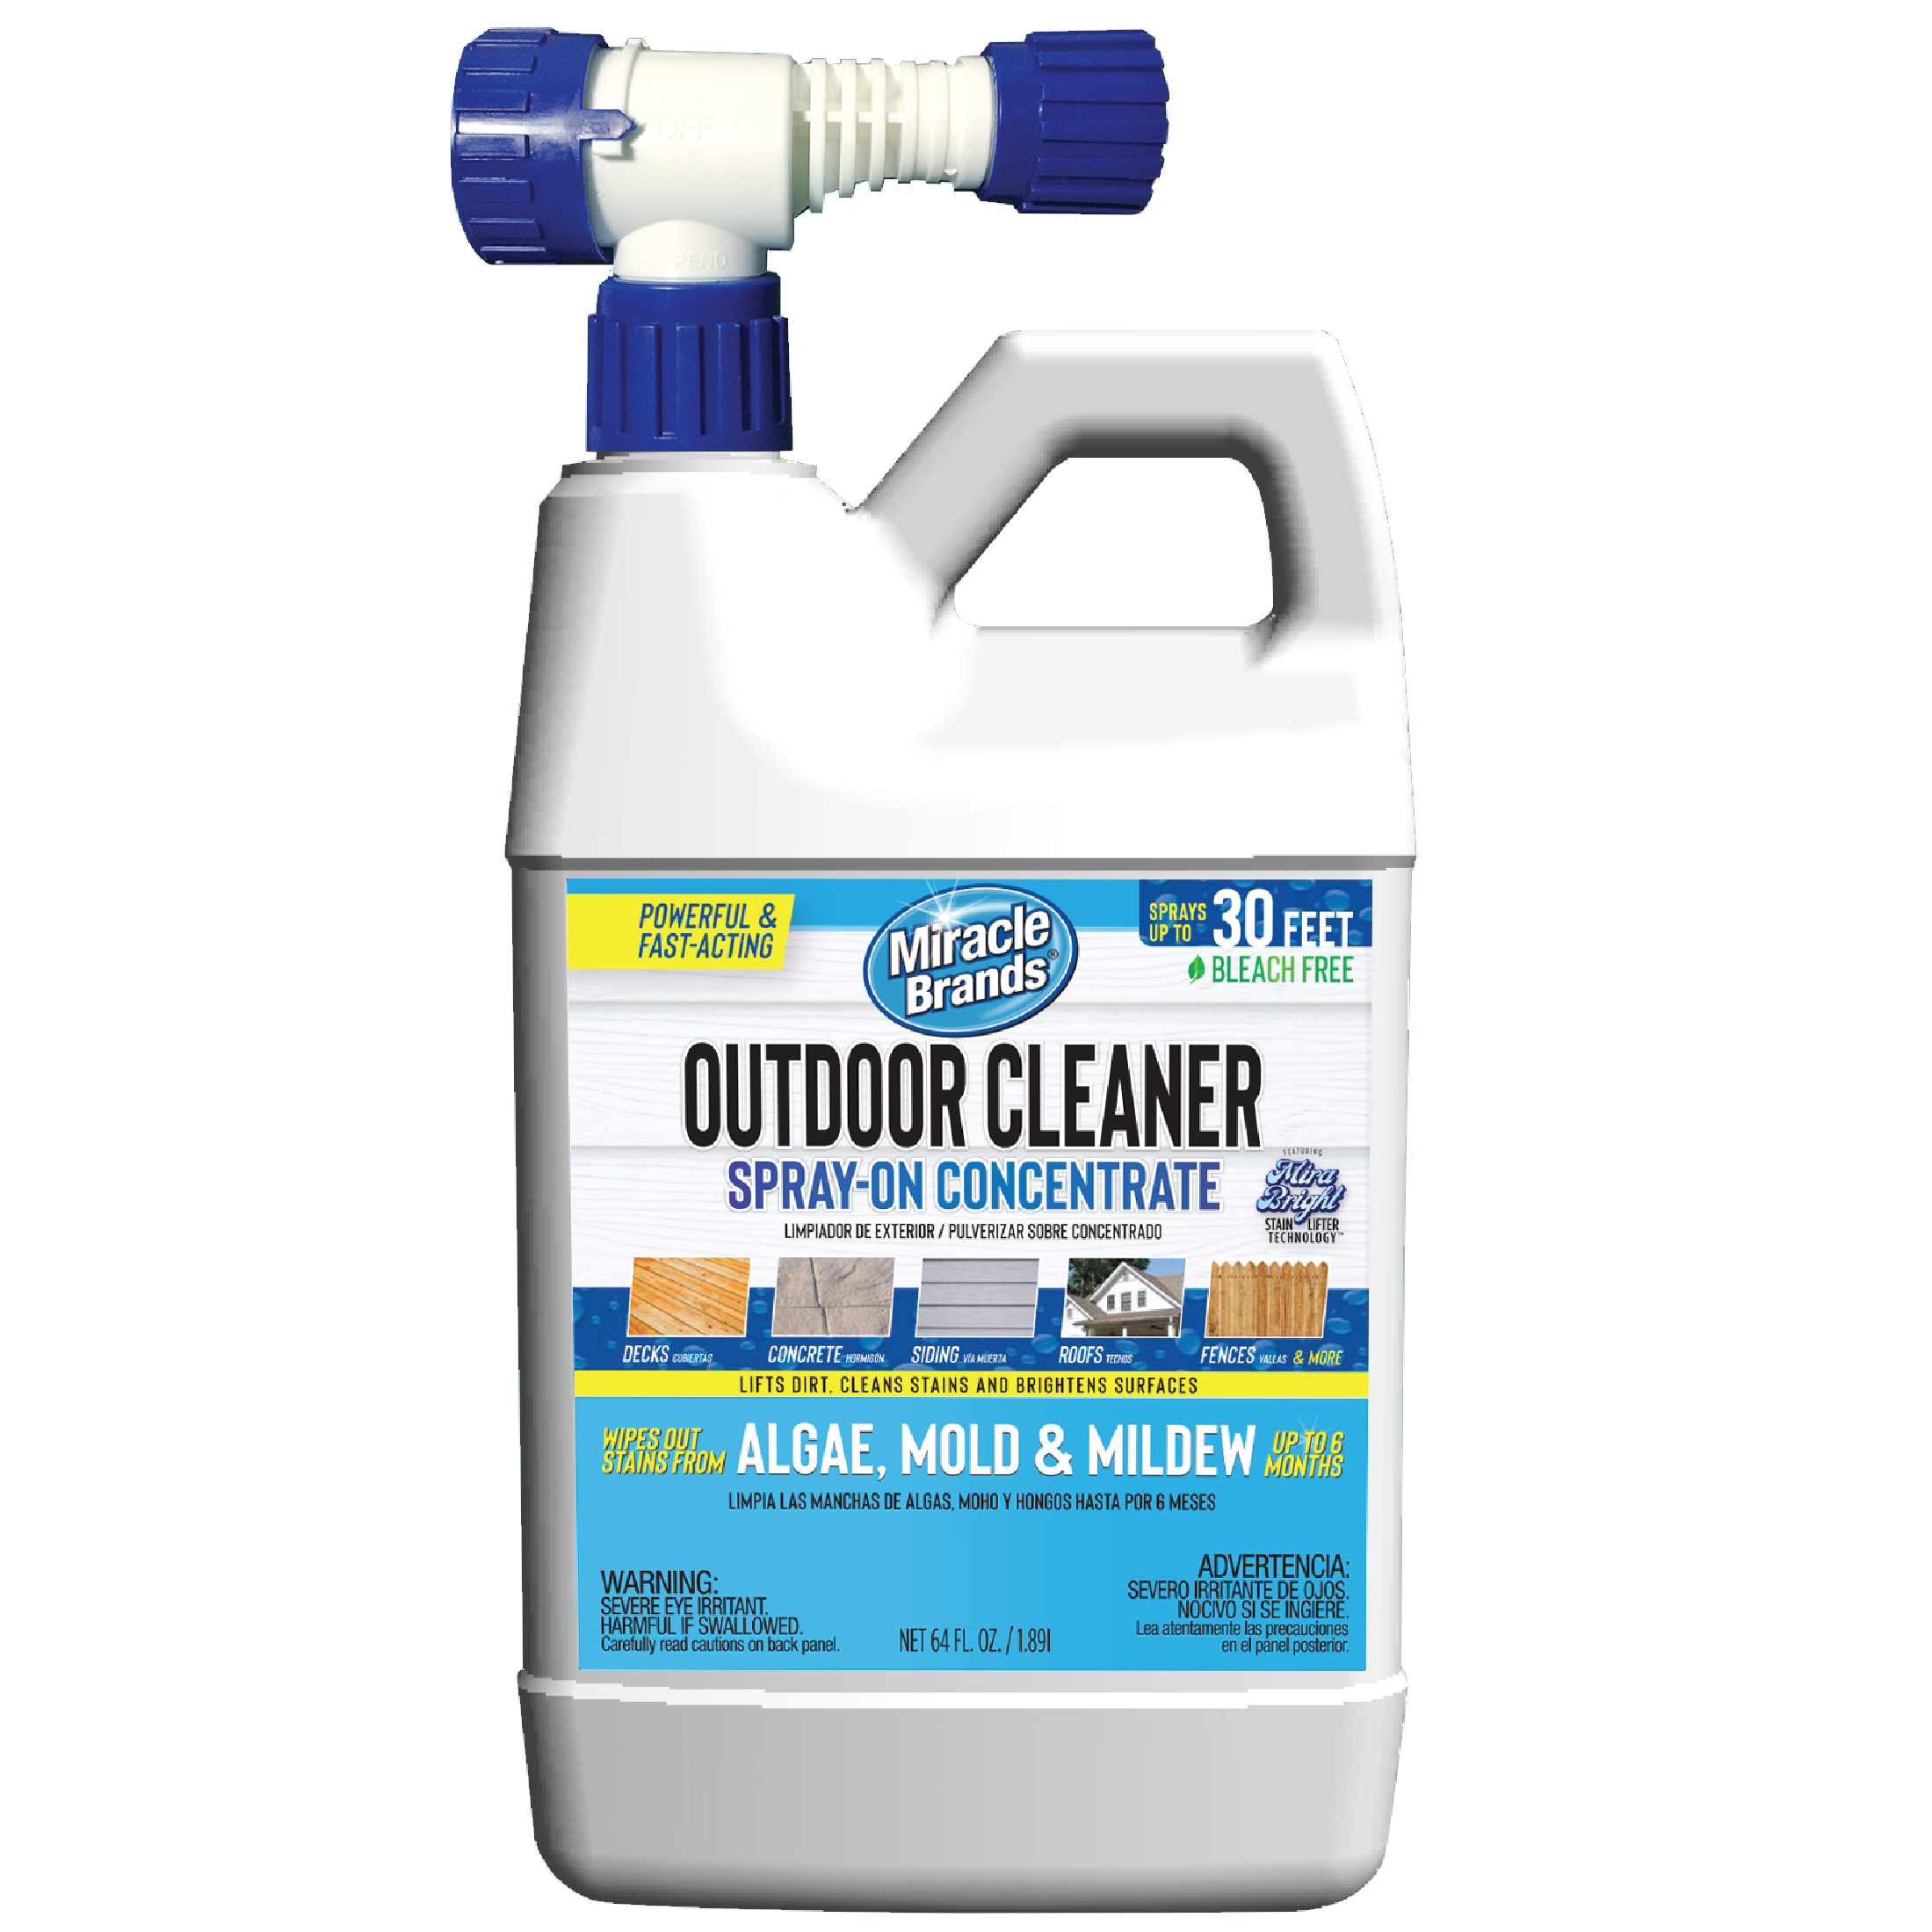 Miracle Brands Outdoor Cleaner Spray On Concentrate for Algae, Mold and Mildew, 64 oz - image 1 of 10